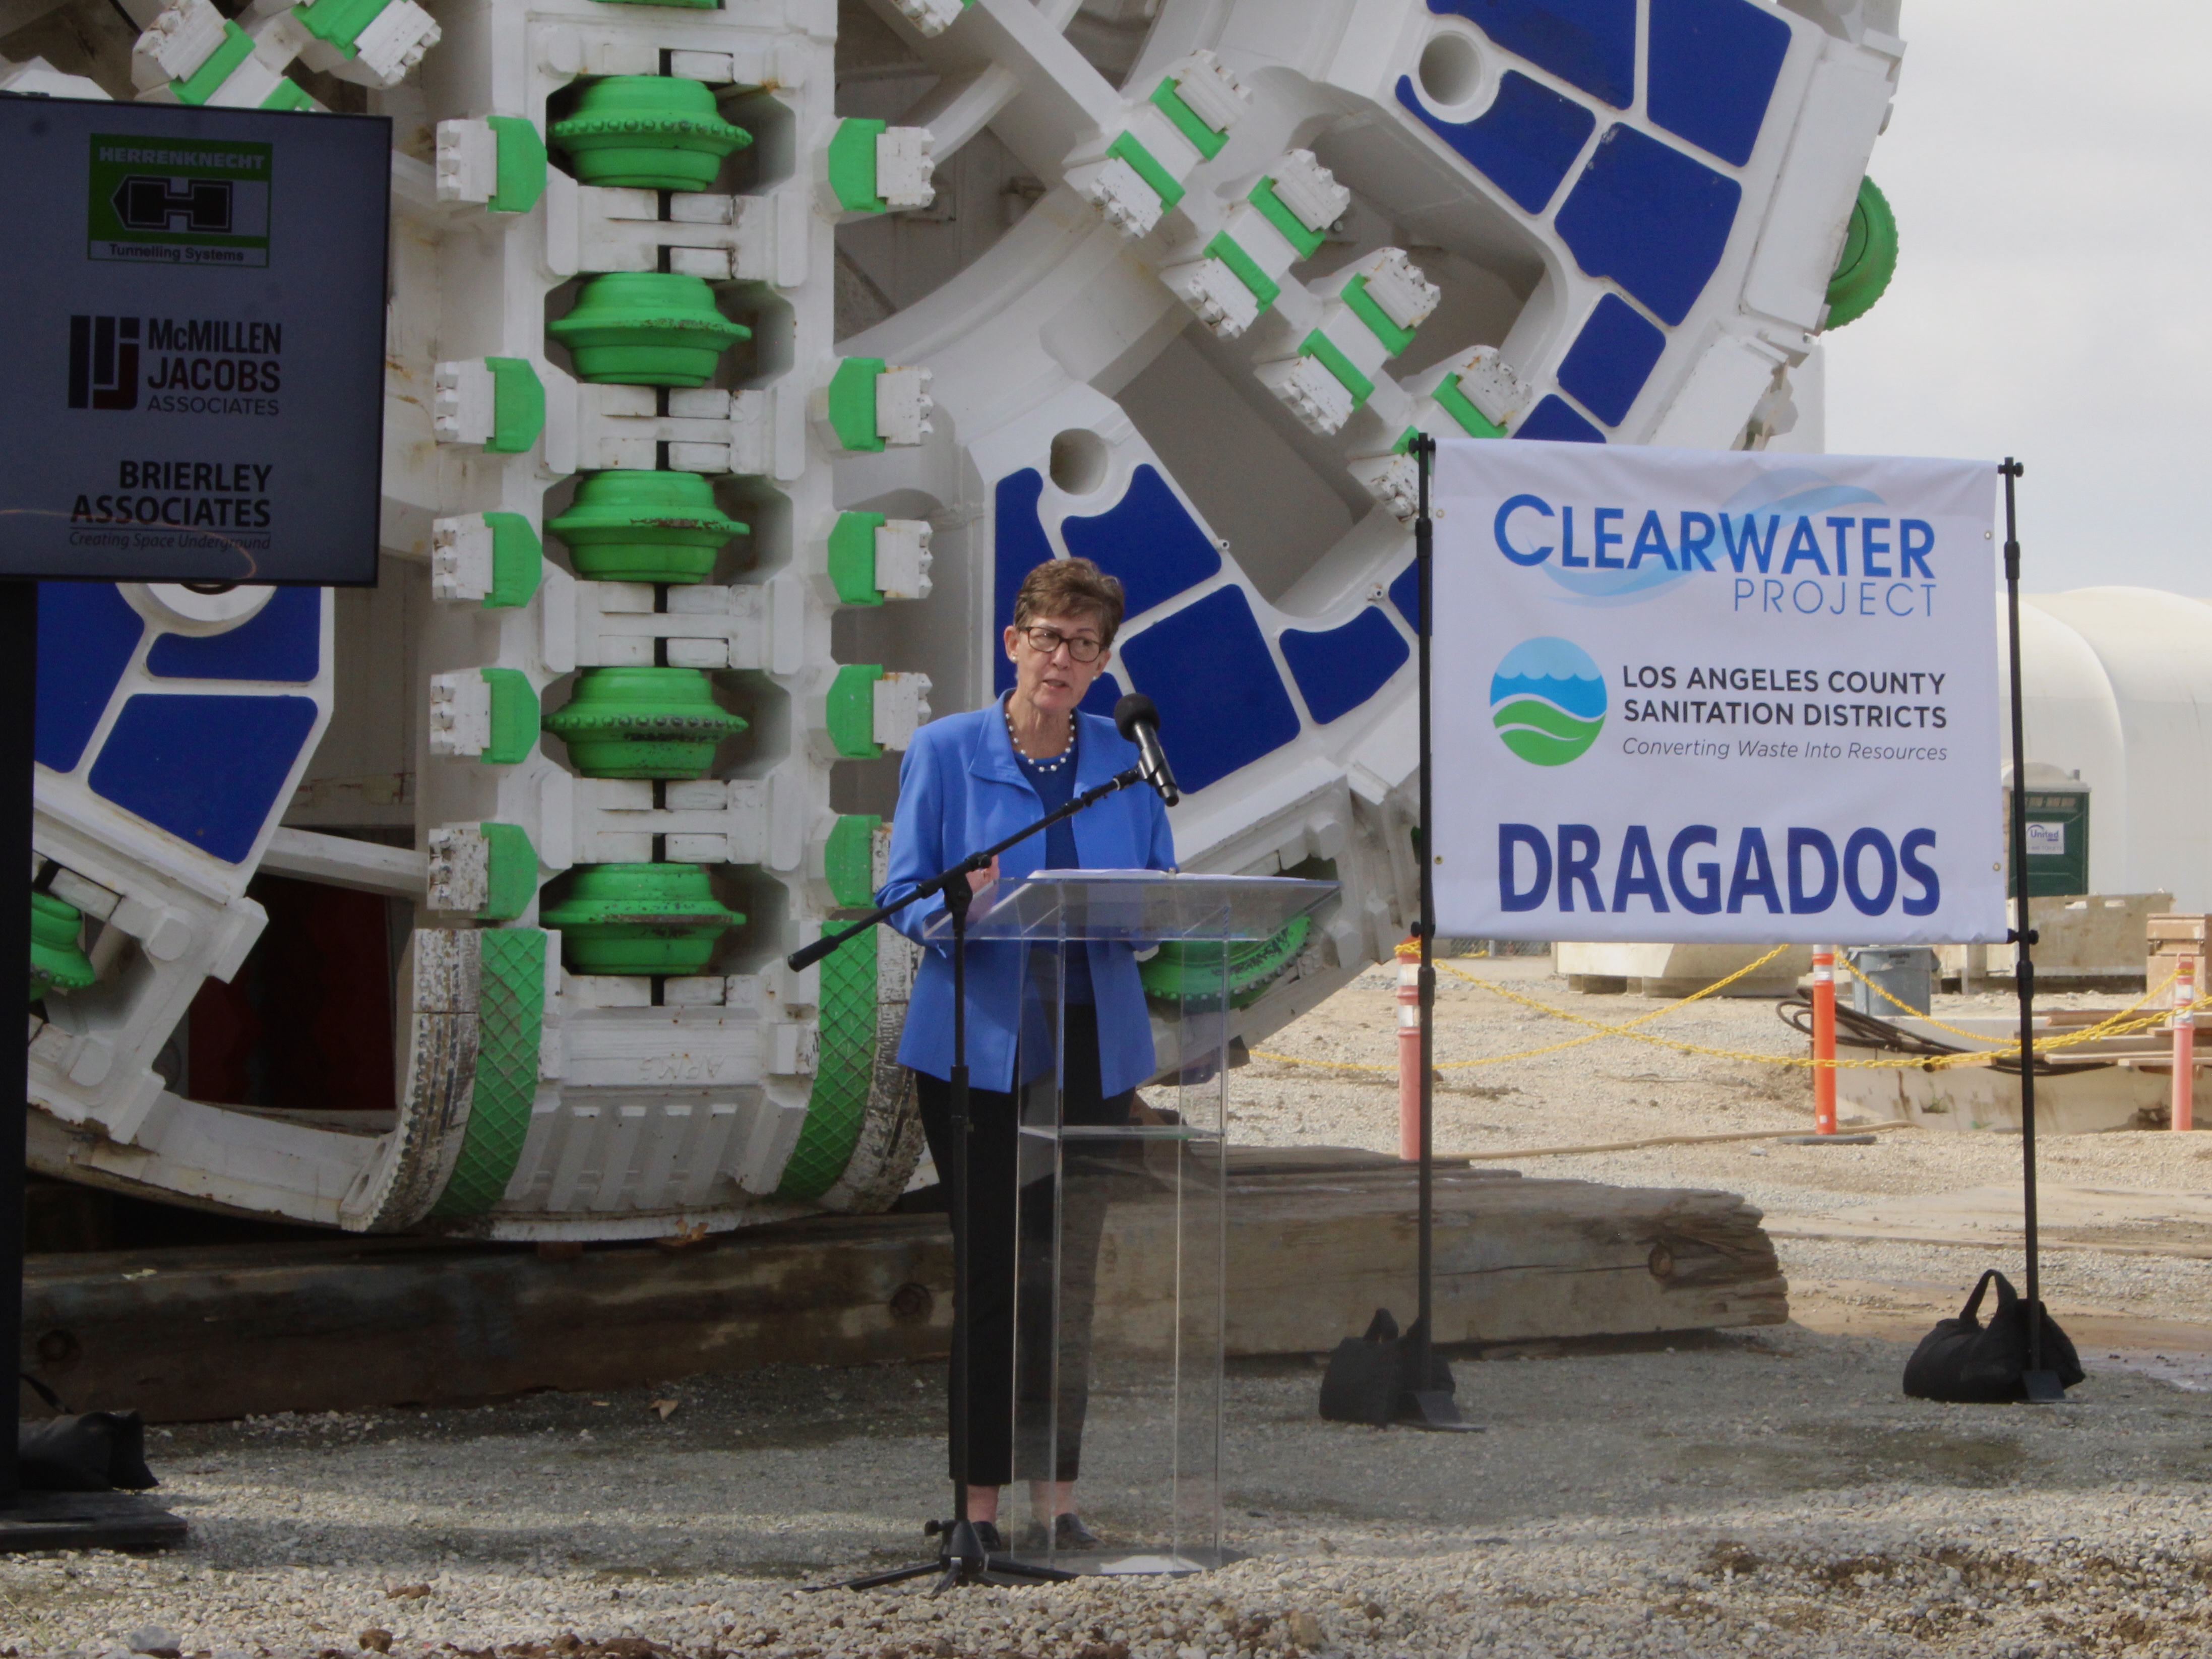 Chairperson Warner providing remarks at Clearwater Launch Event